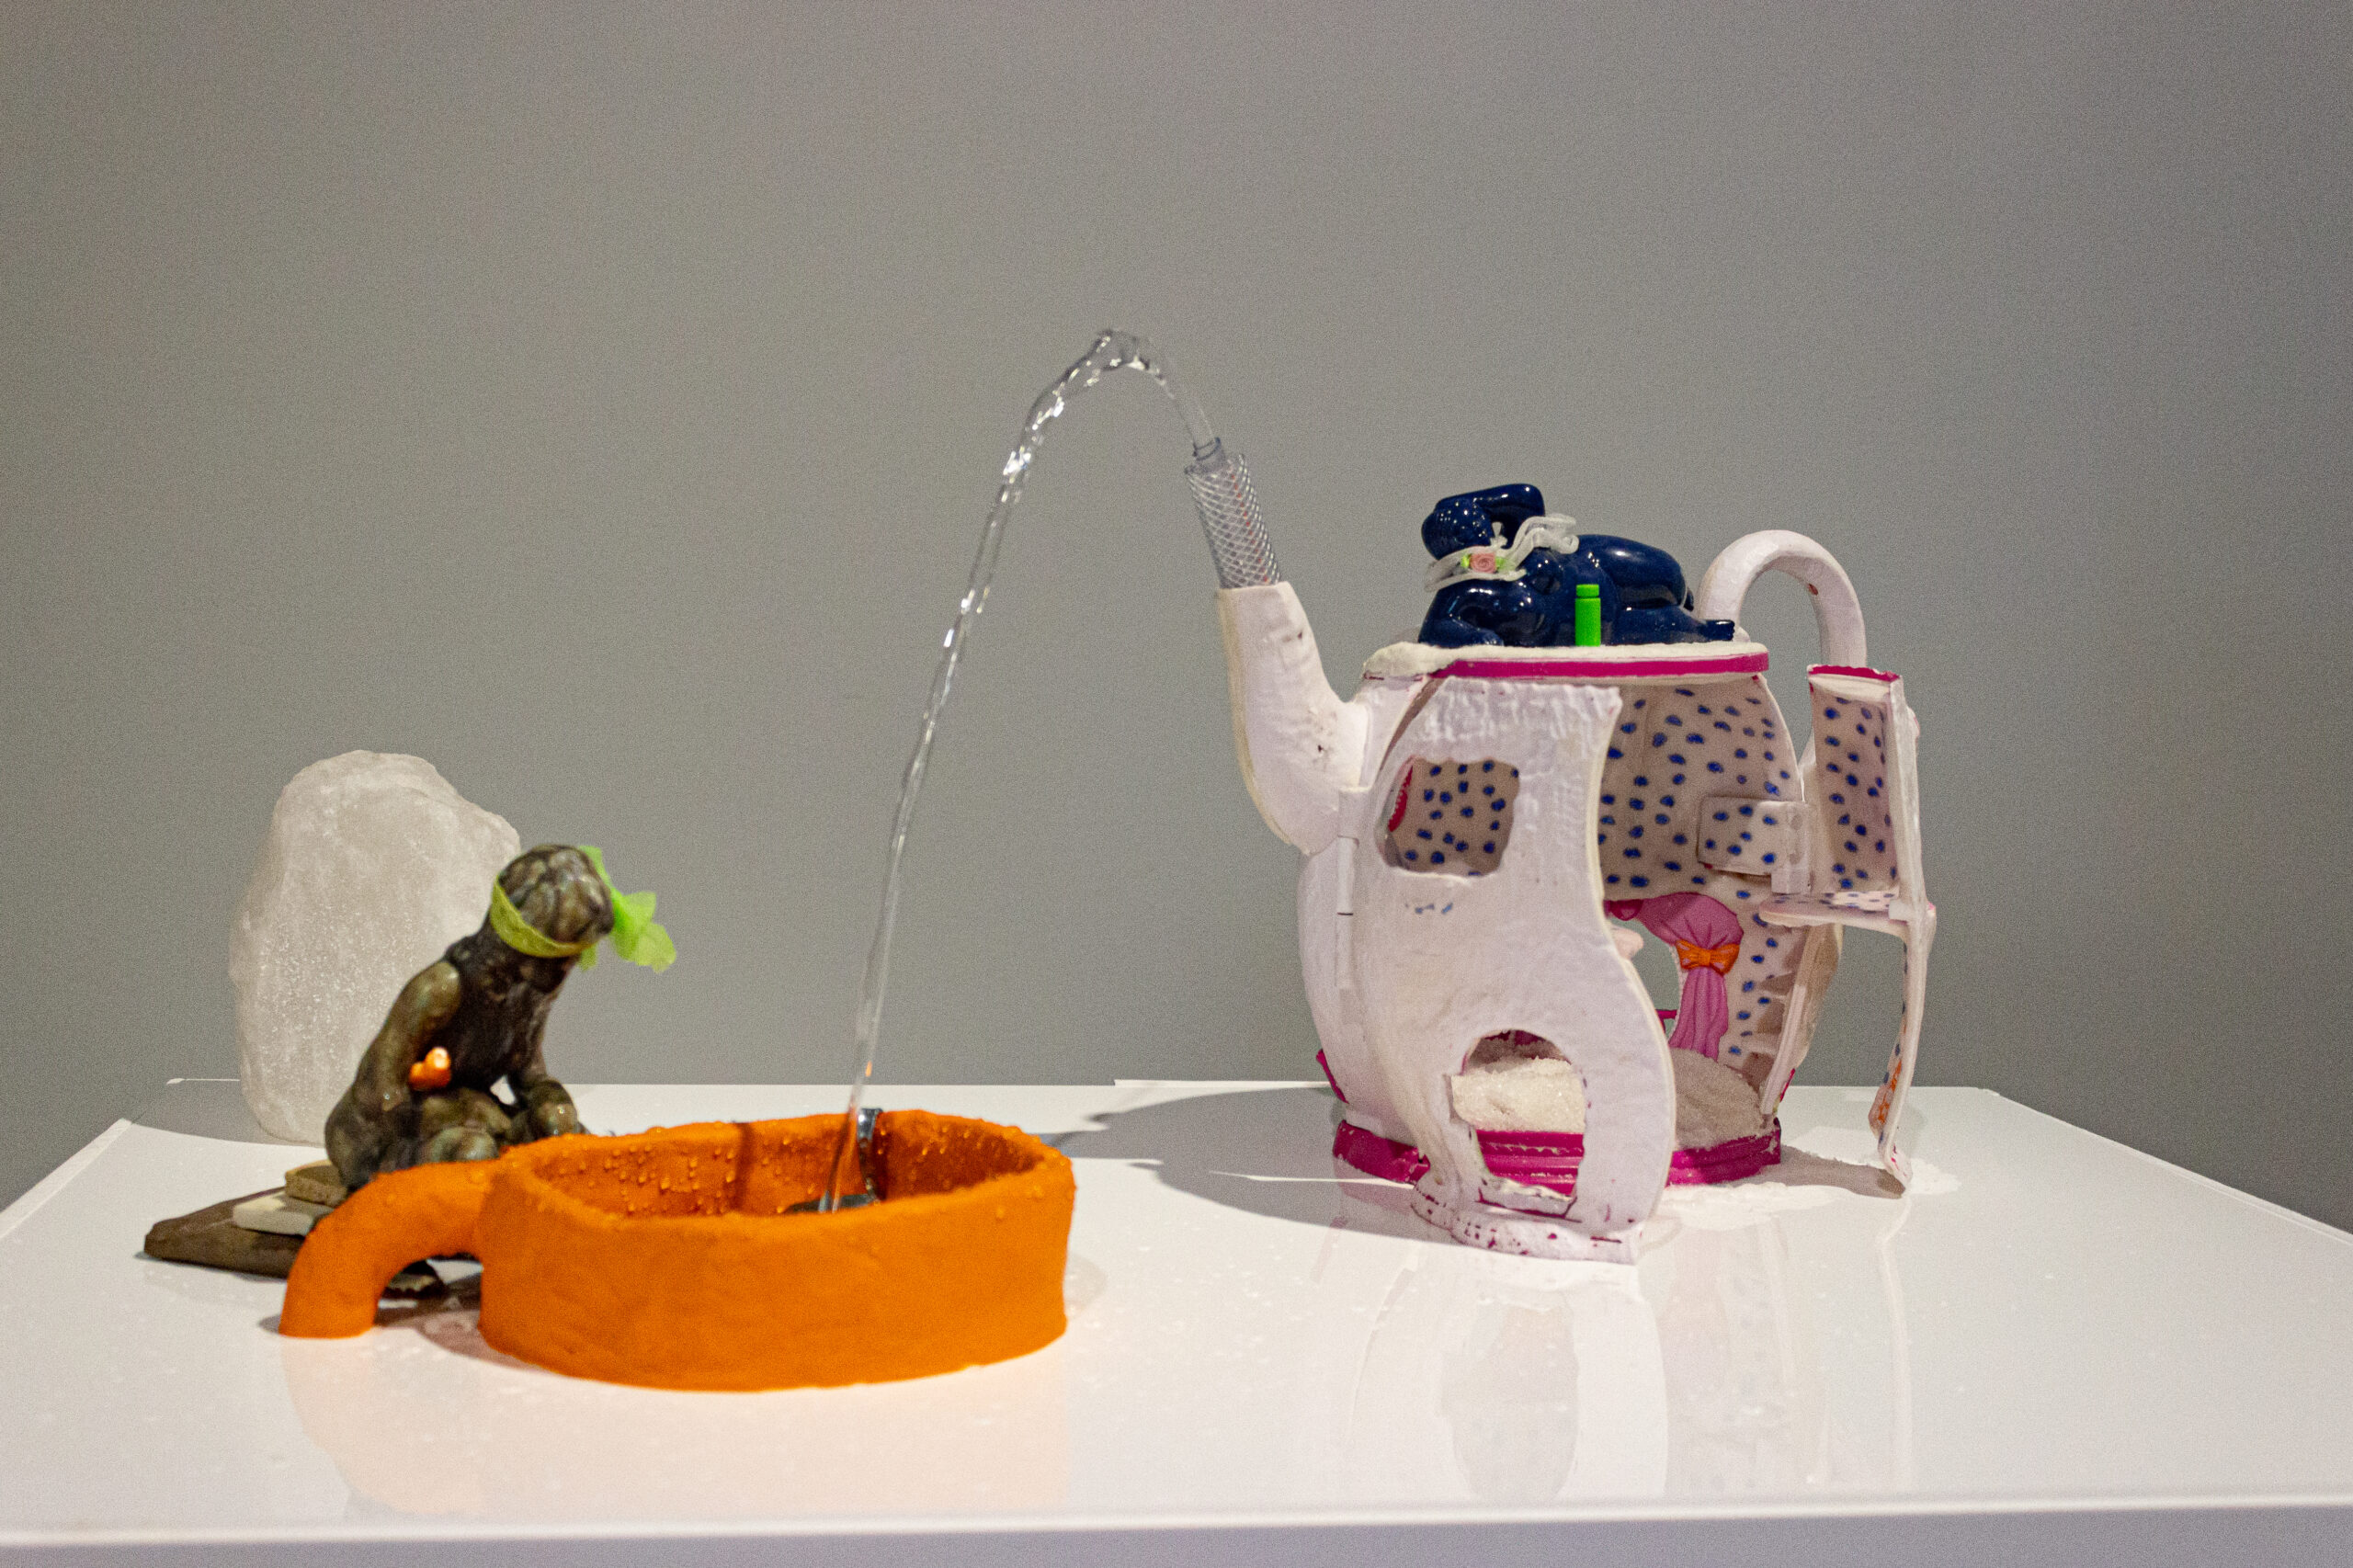 A sculpture of a white teapot with the front half open with windows like a dollhouse with the navy polka dots on the interior wallpaper. Water is coming out of the spout like a fountain, into an orange clay dish. Leaned over above the dish, a copper sculpture is kneeling over it.